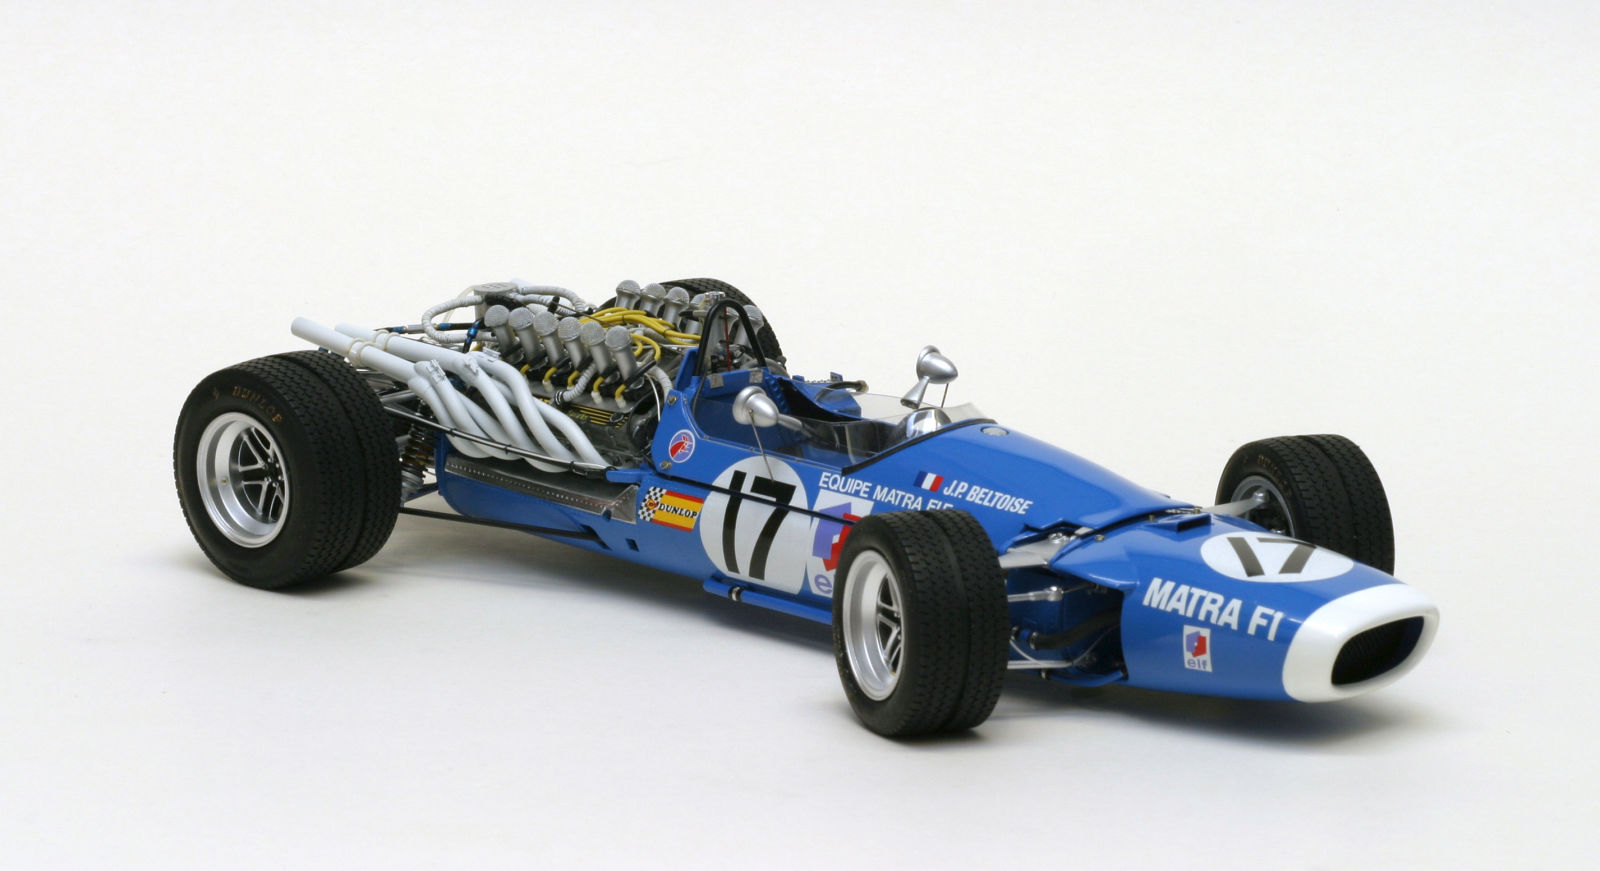 Illustration for article titled Incredibly detailed Matra MS11 model